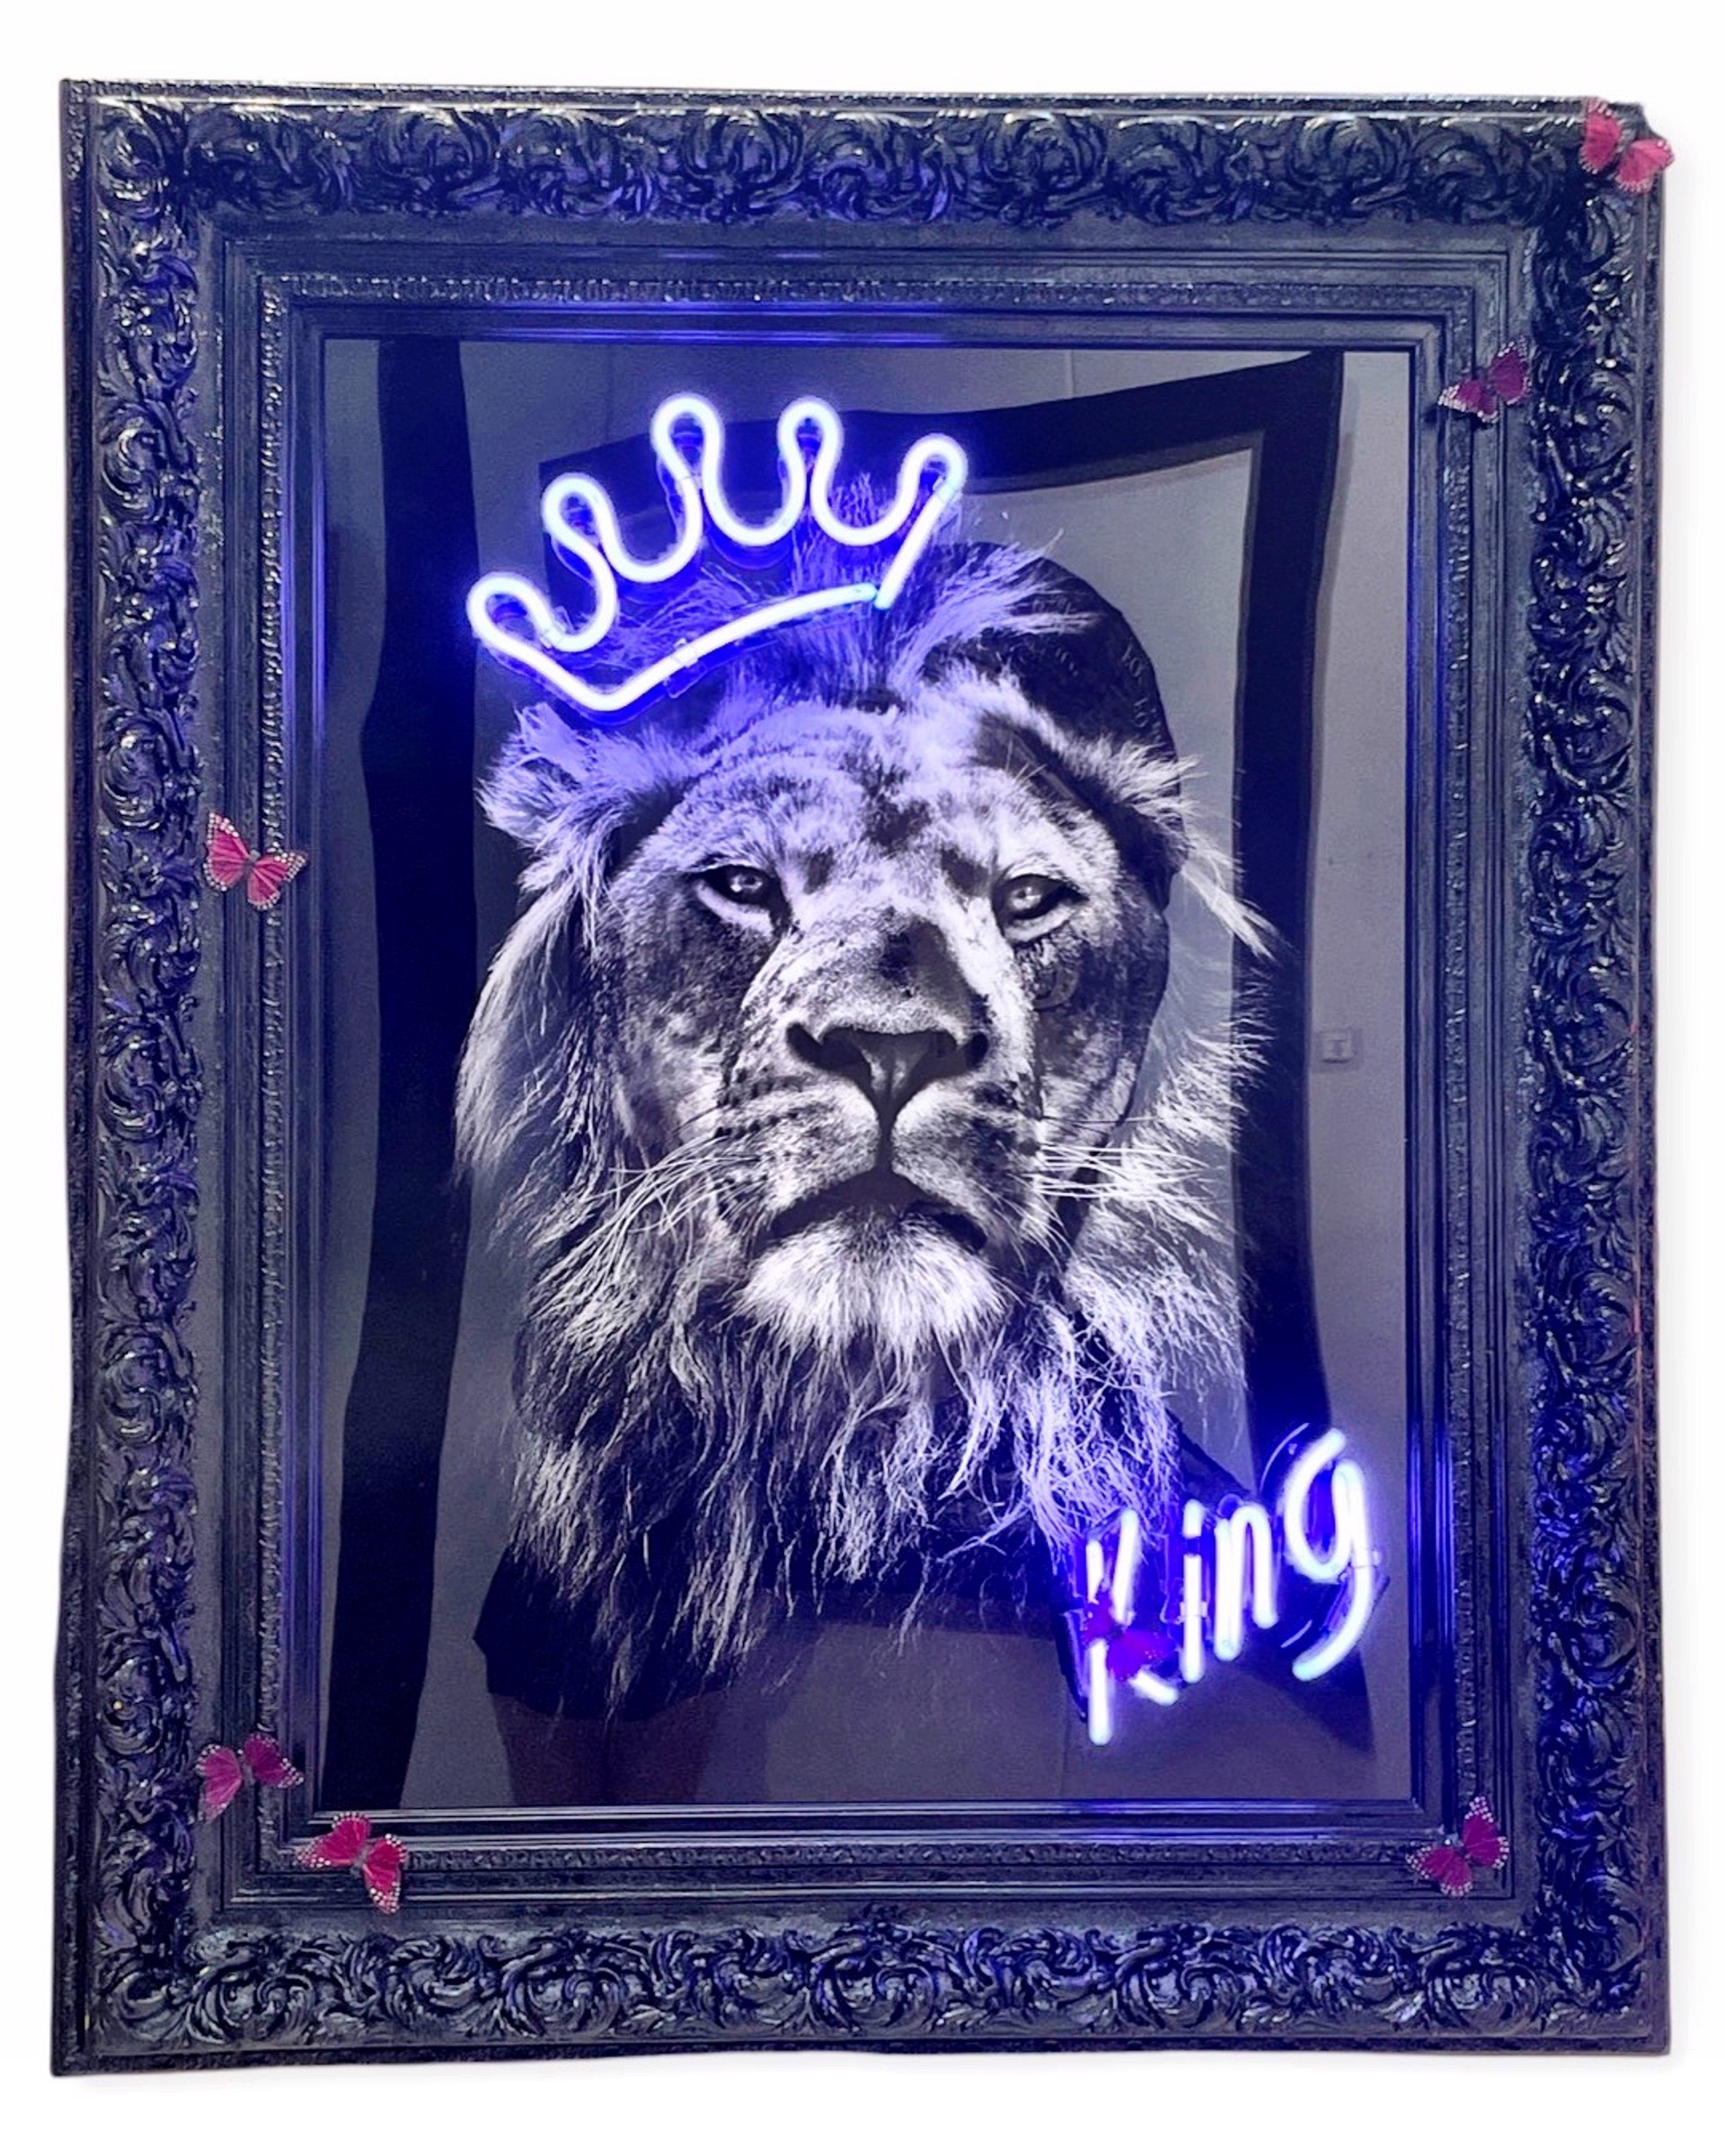 Lion King with Baroque Frame by Behind Pink Walls